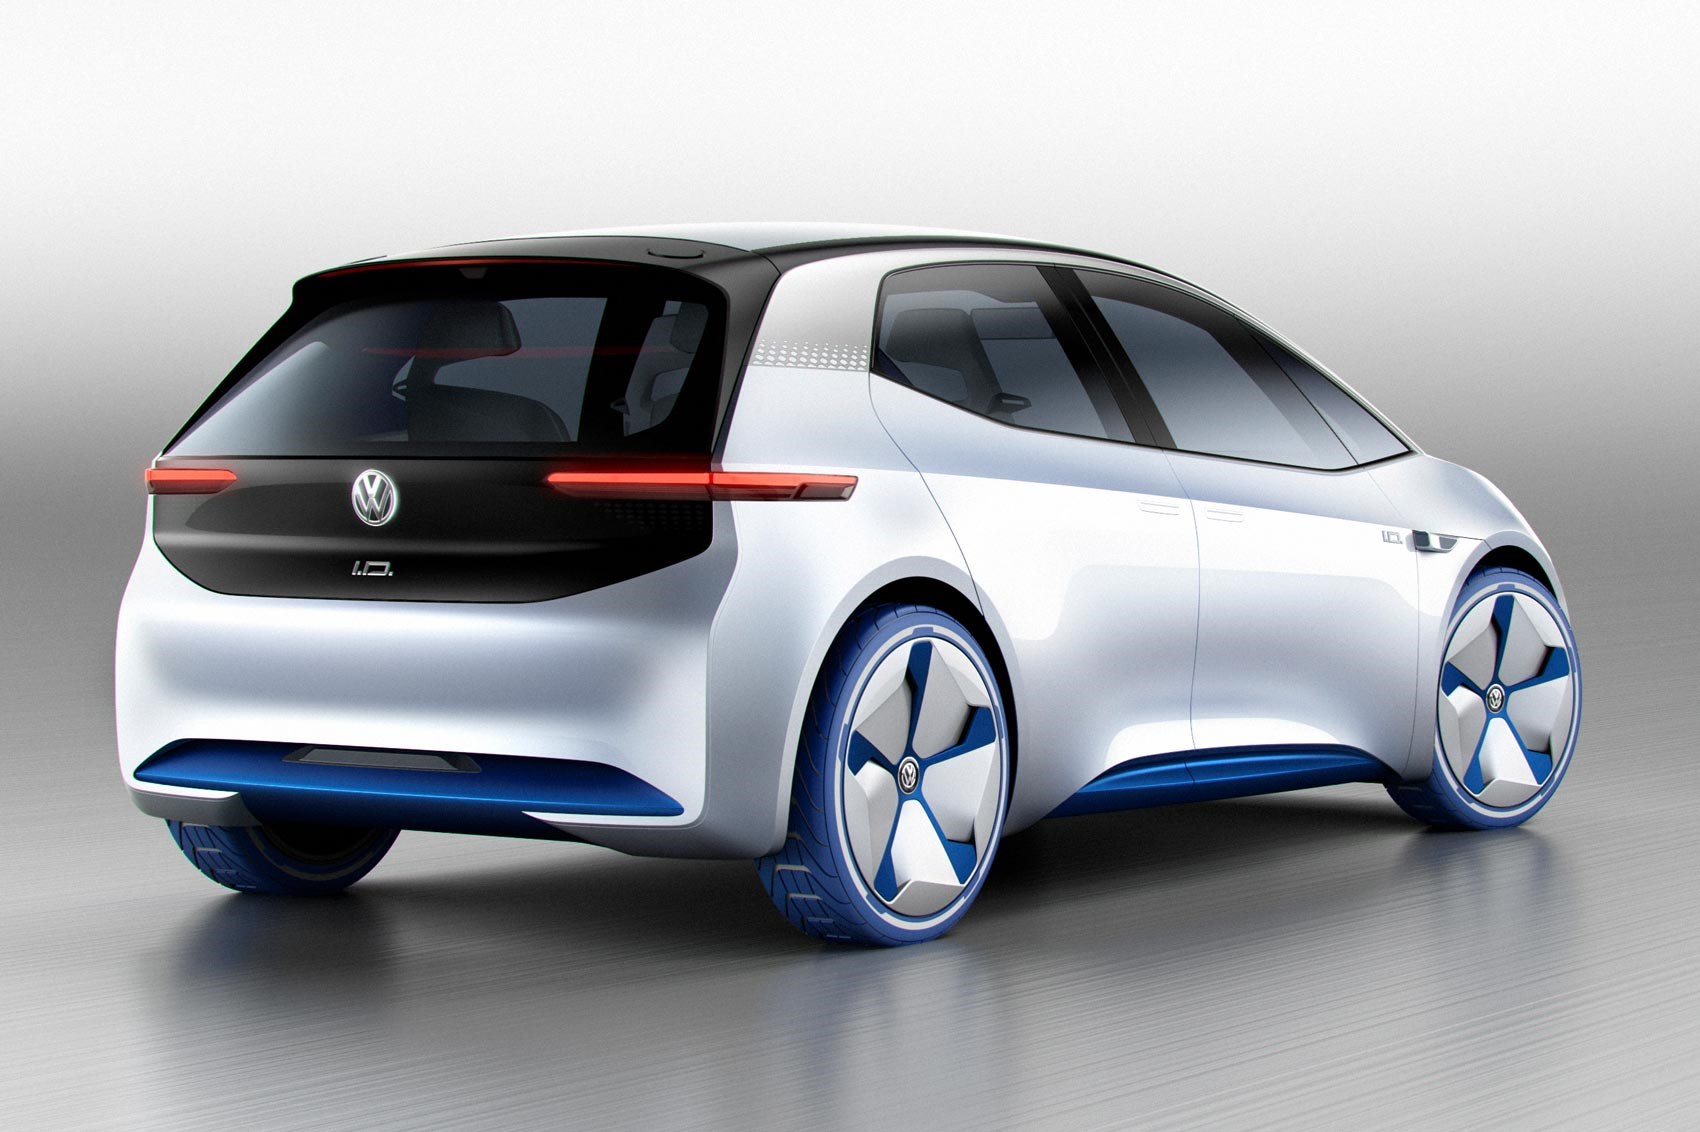 Volkswagen Is Betting Its Future On Electric Cars! Because Future is Electric Automotive - Mody Group